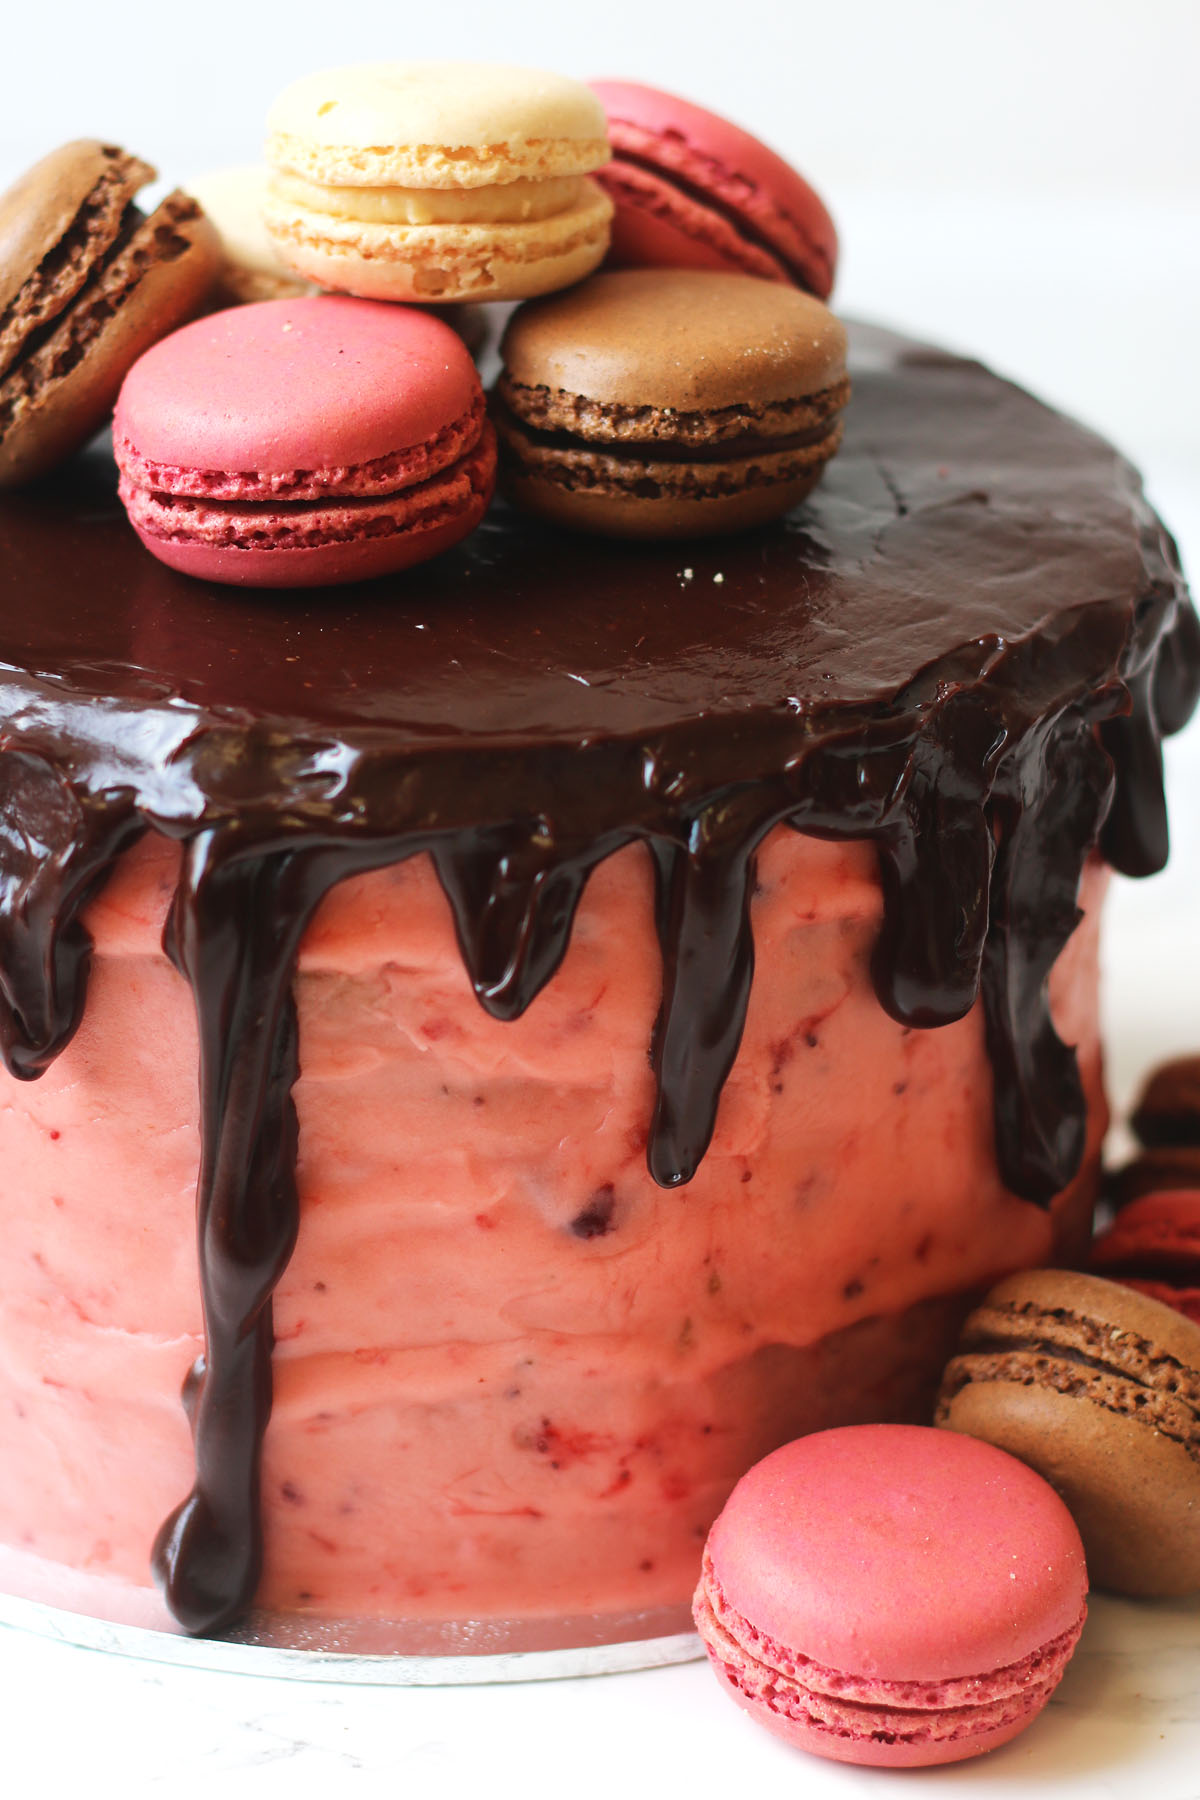 Neapolitan cake - layers of vanilla and chocolate sponge covered in real strawberry buttercream and chocolate ganache and topped with macarons